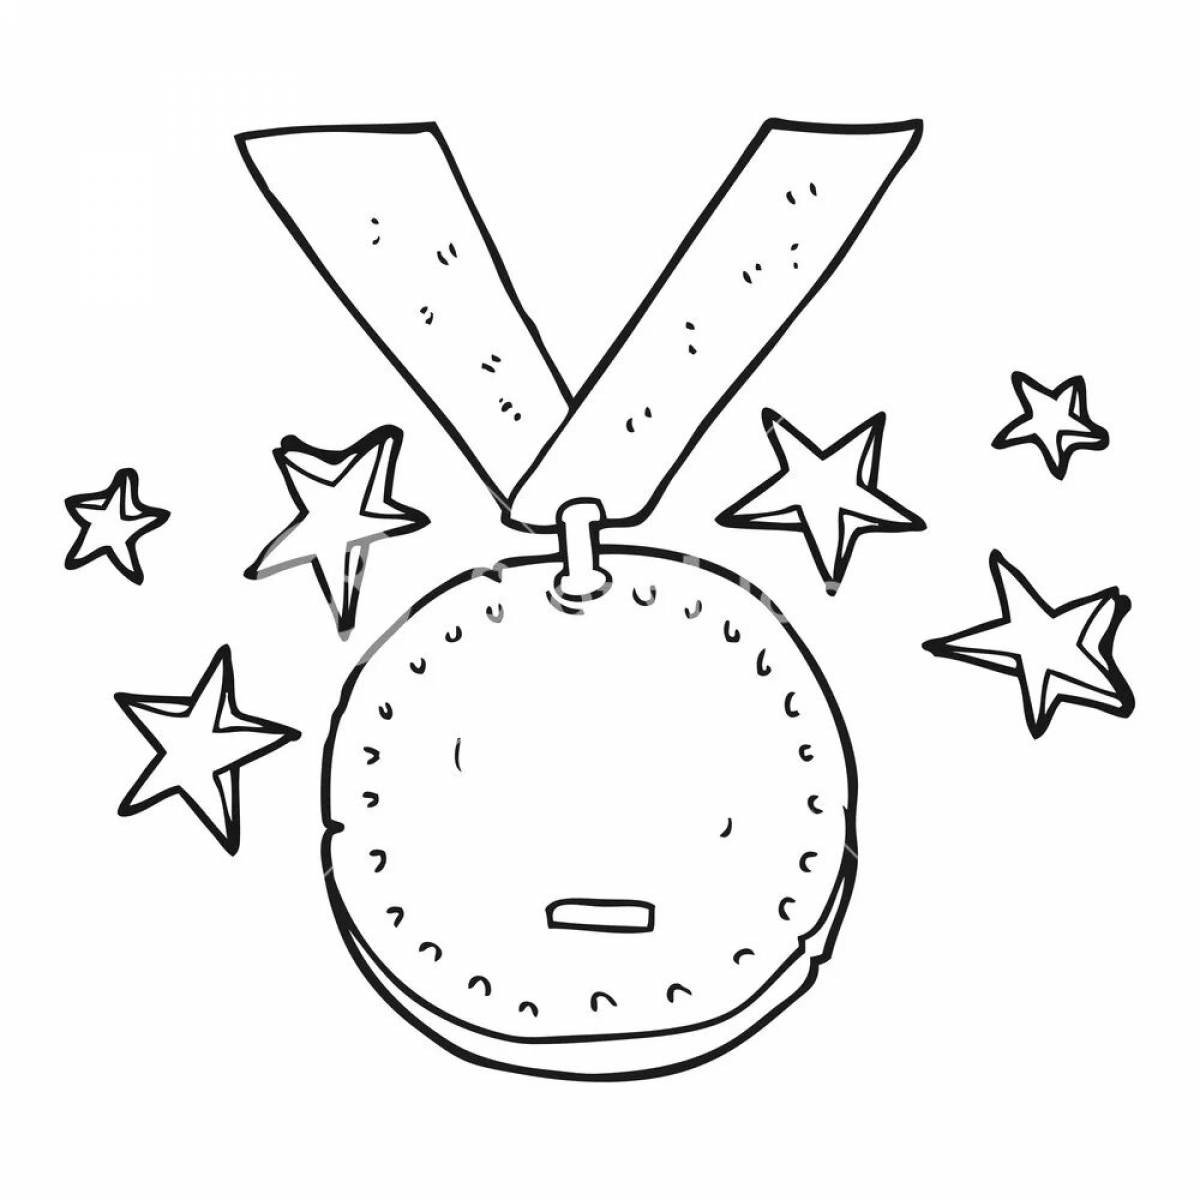 Fancy medal coloring page